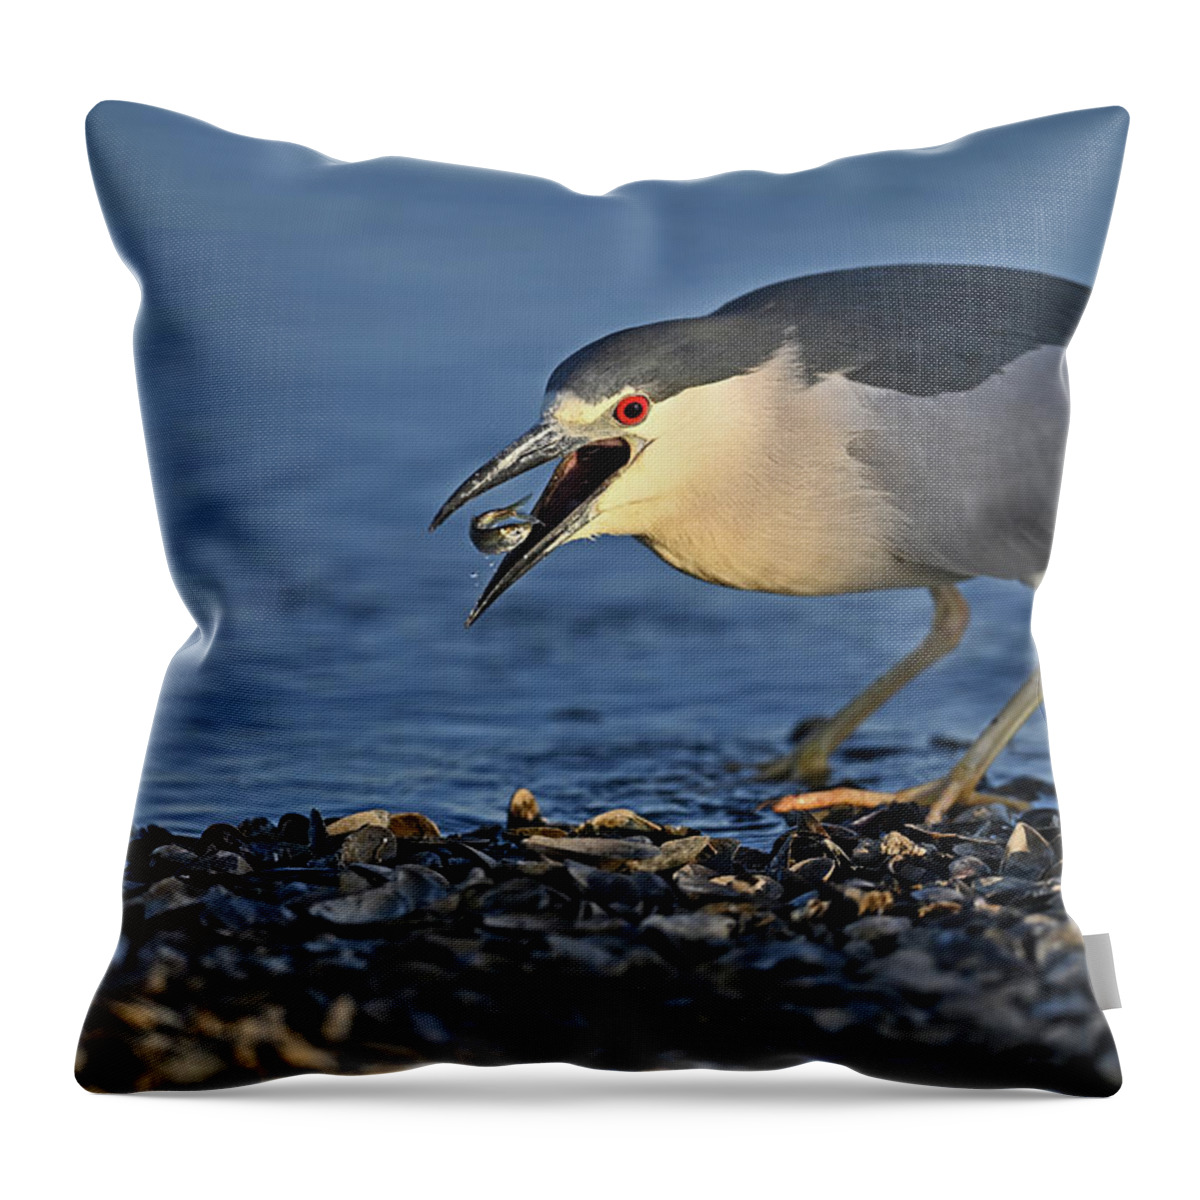  Nycticorax Nycticorax Throw Pillow featuring the photograph Black-crowned Night Heron Gobbling Fish by Amazing Action Photo Video